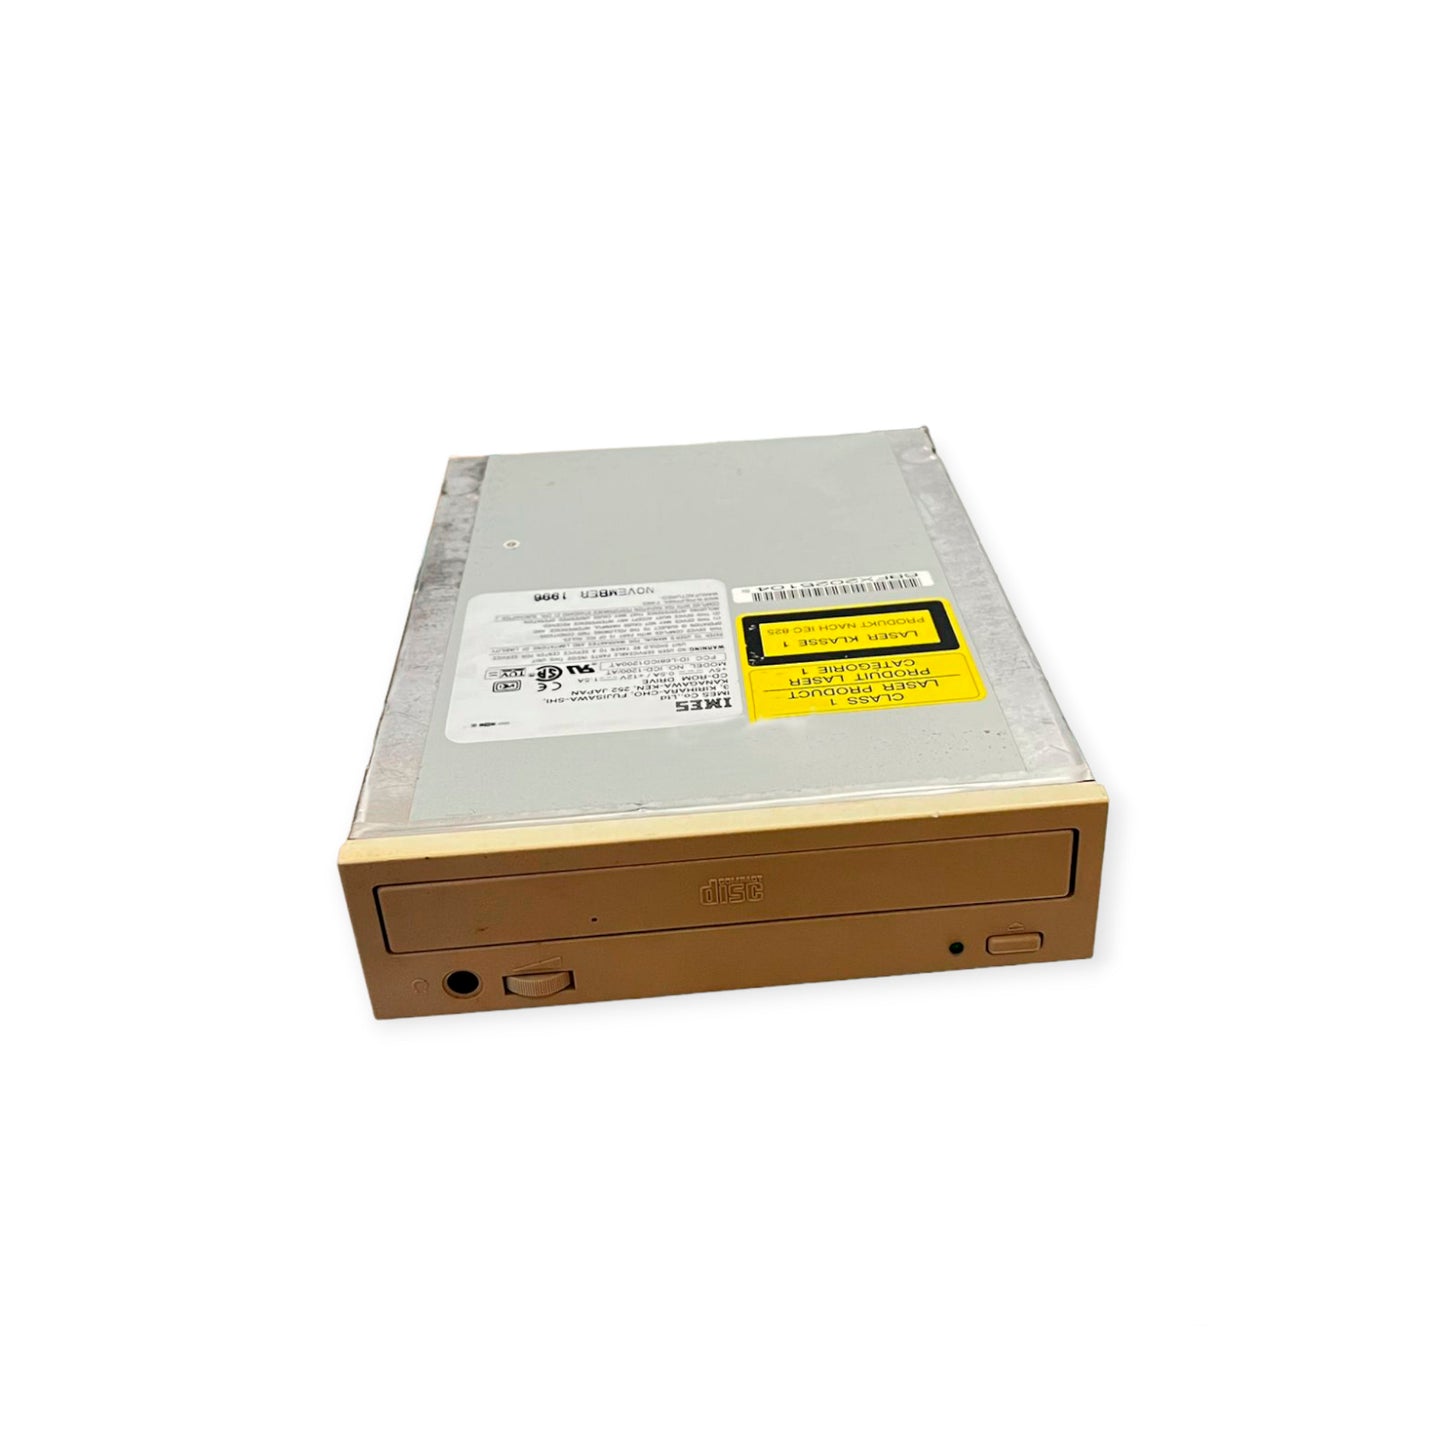 Leitor de CD-ROM IMES model ICD-1200/AT IDE